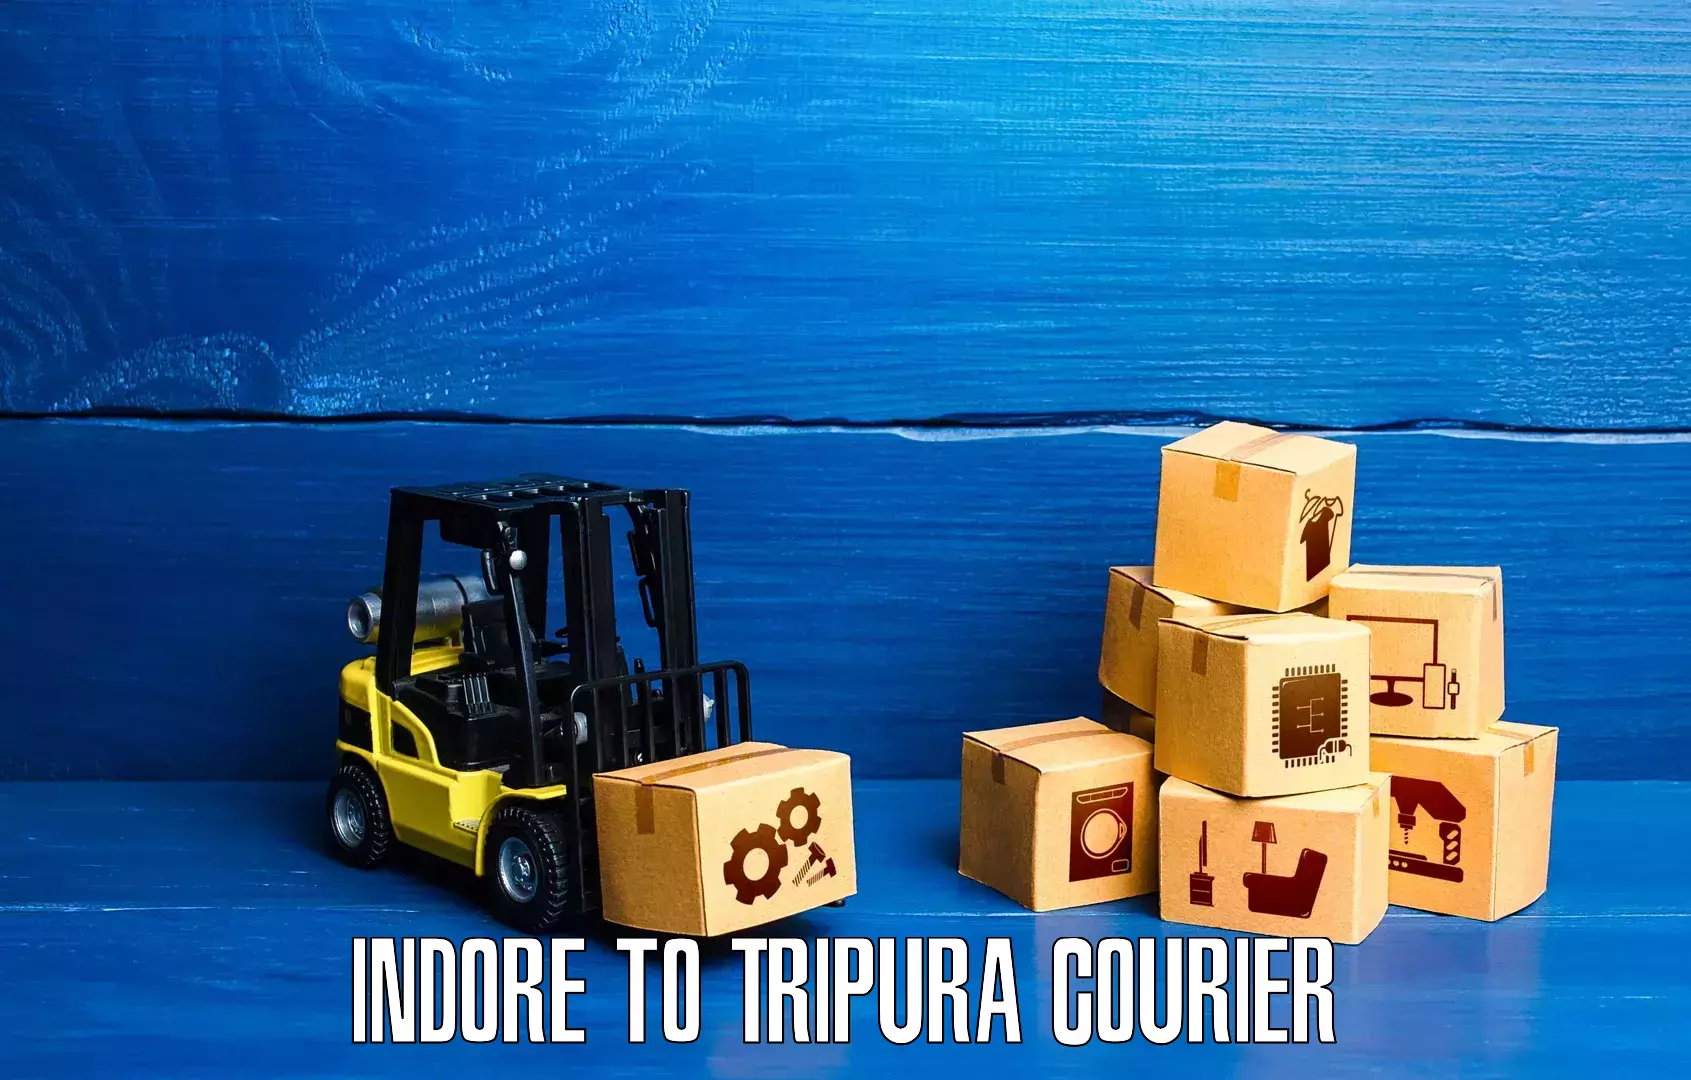 Advanced tracking systems Indore to Udaipur Tripura